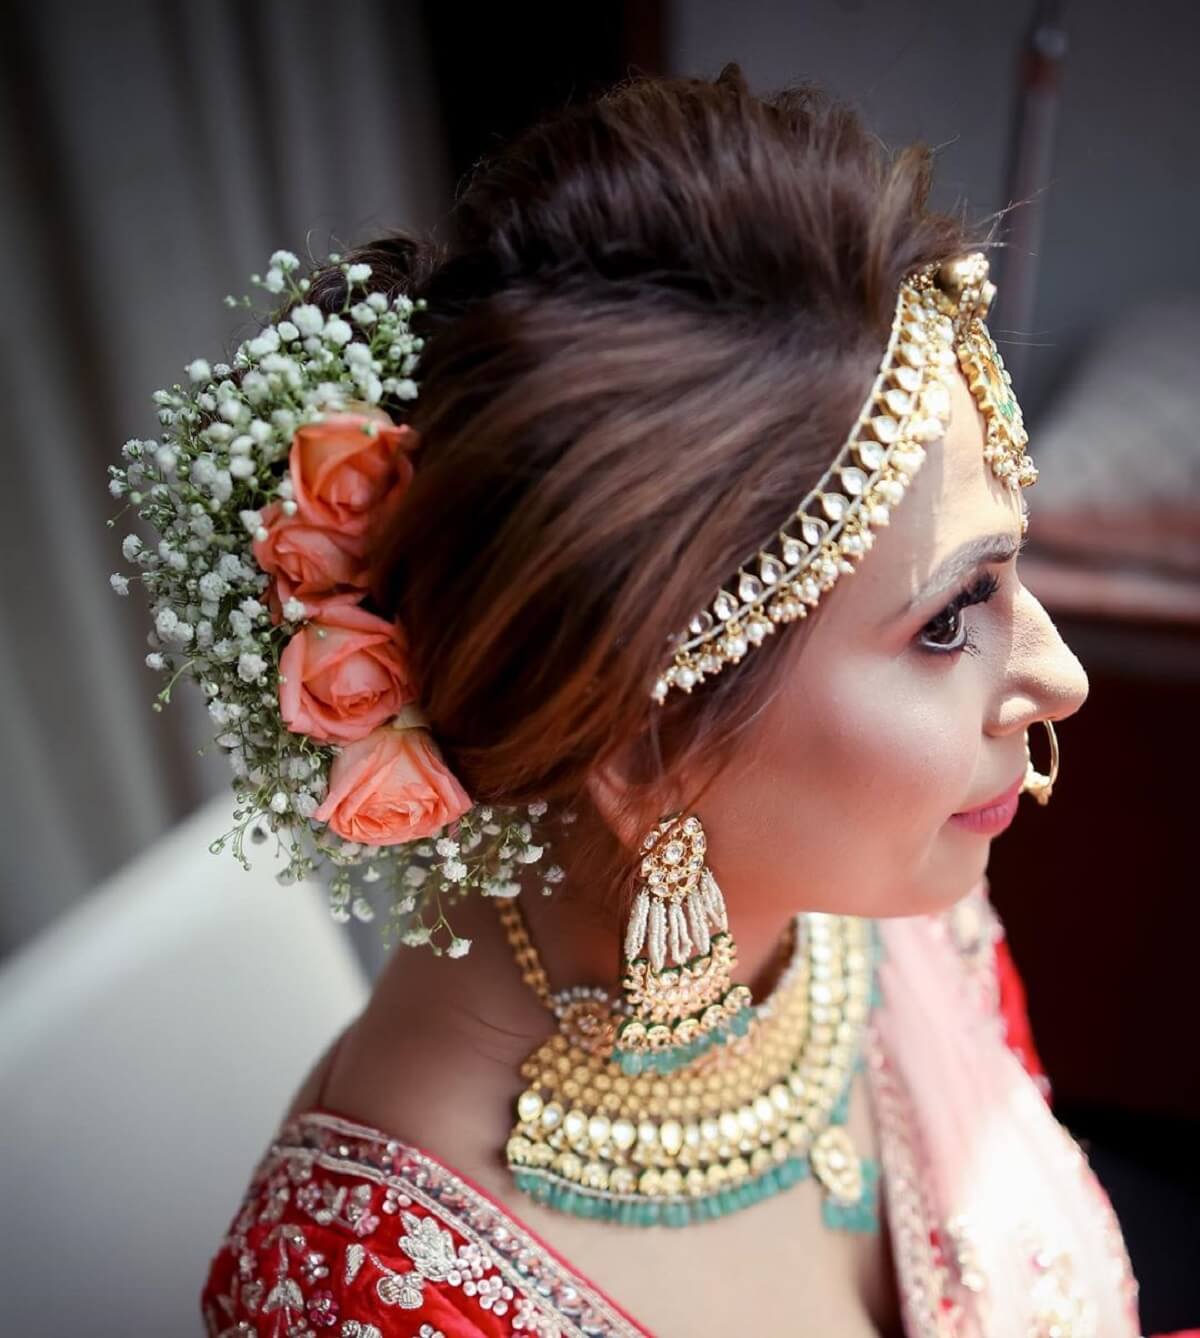 These Open Hairstyles For Bridal Hairdo Will Make You Ditch Buns